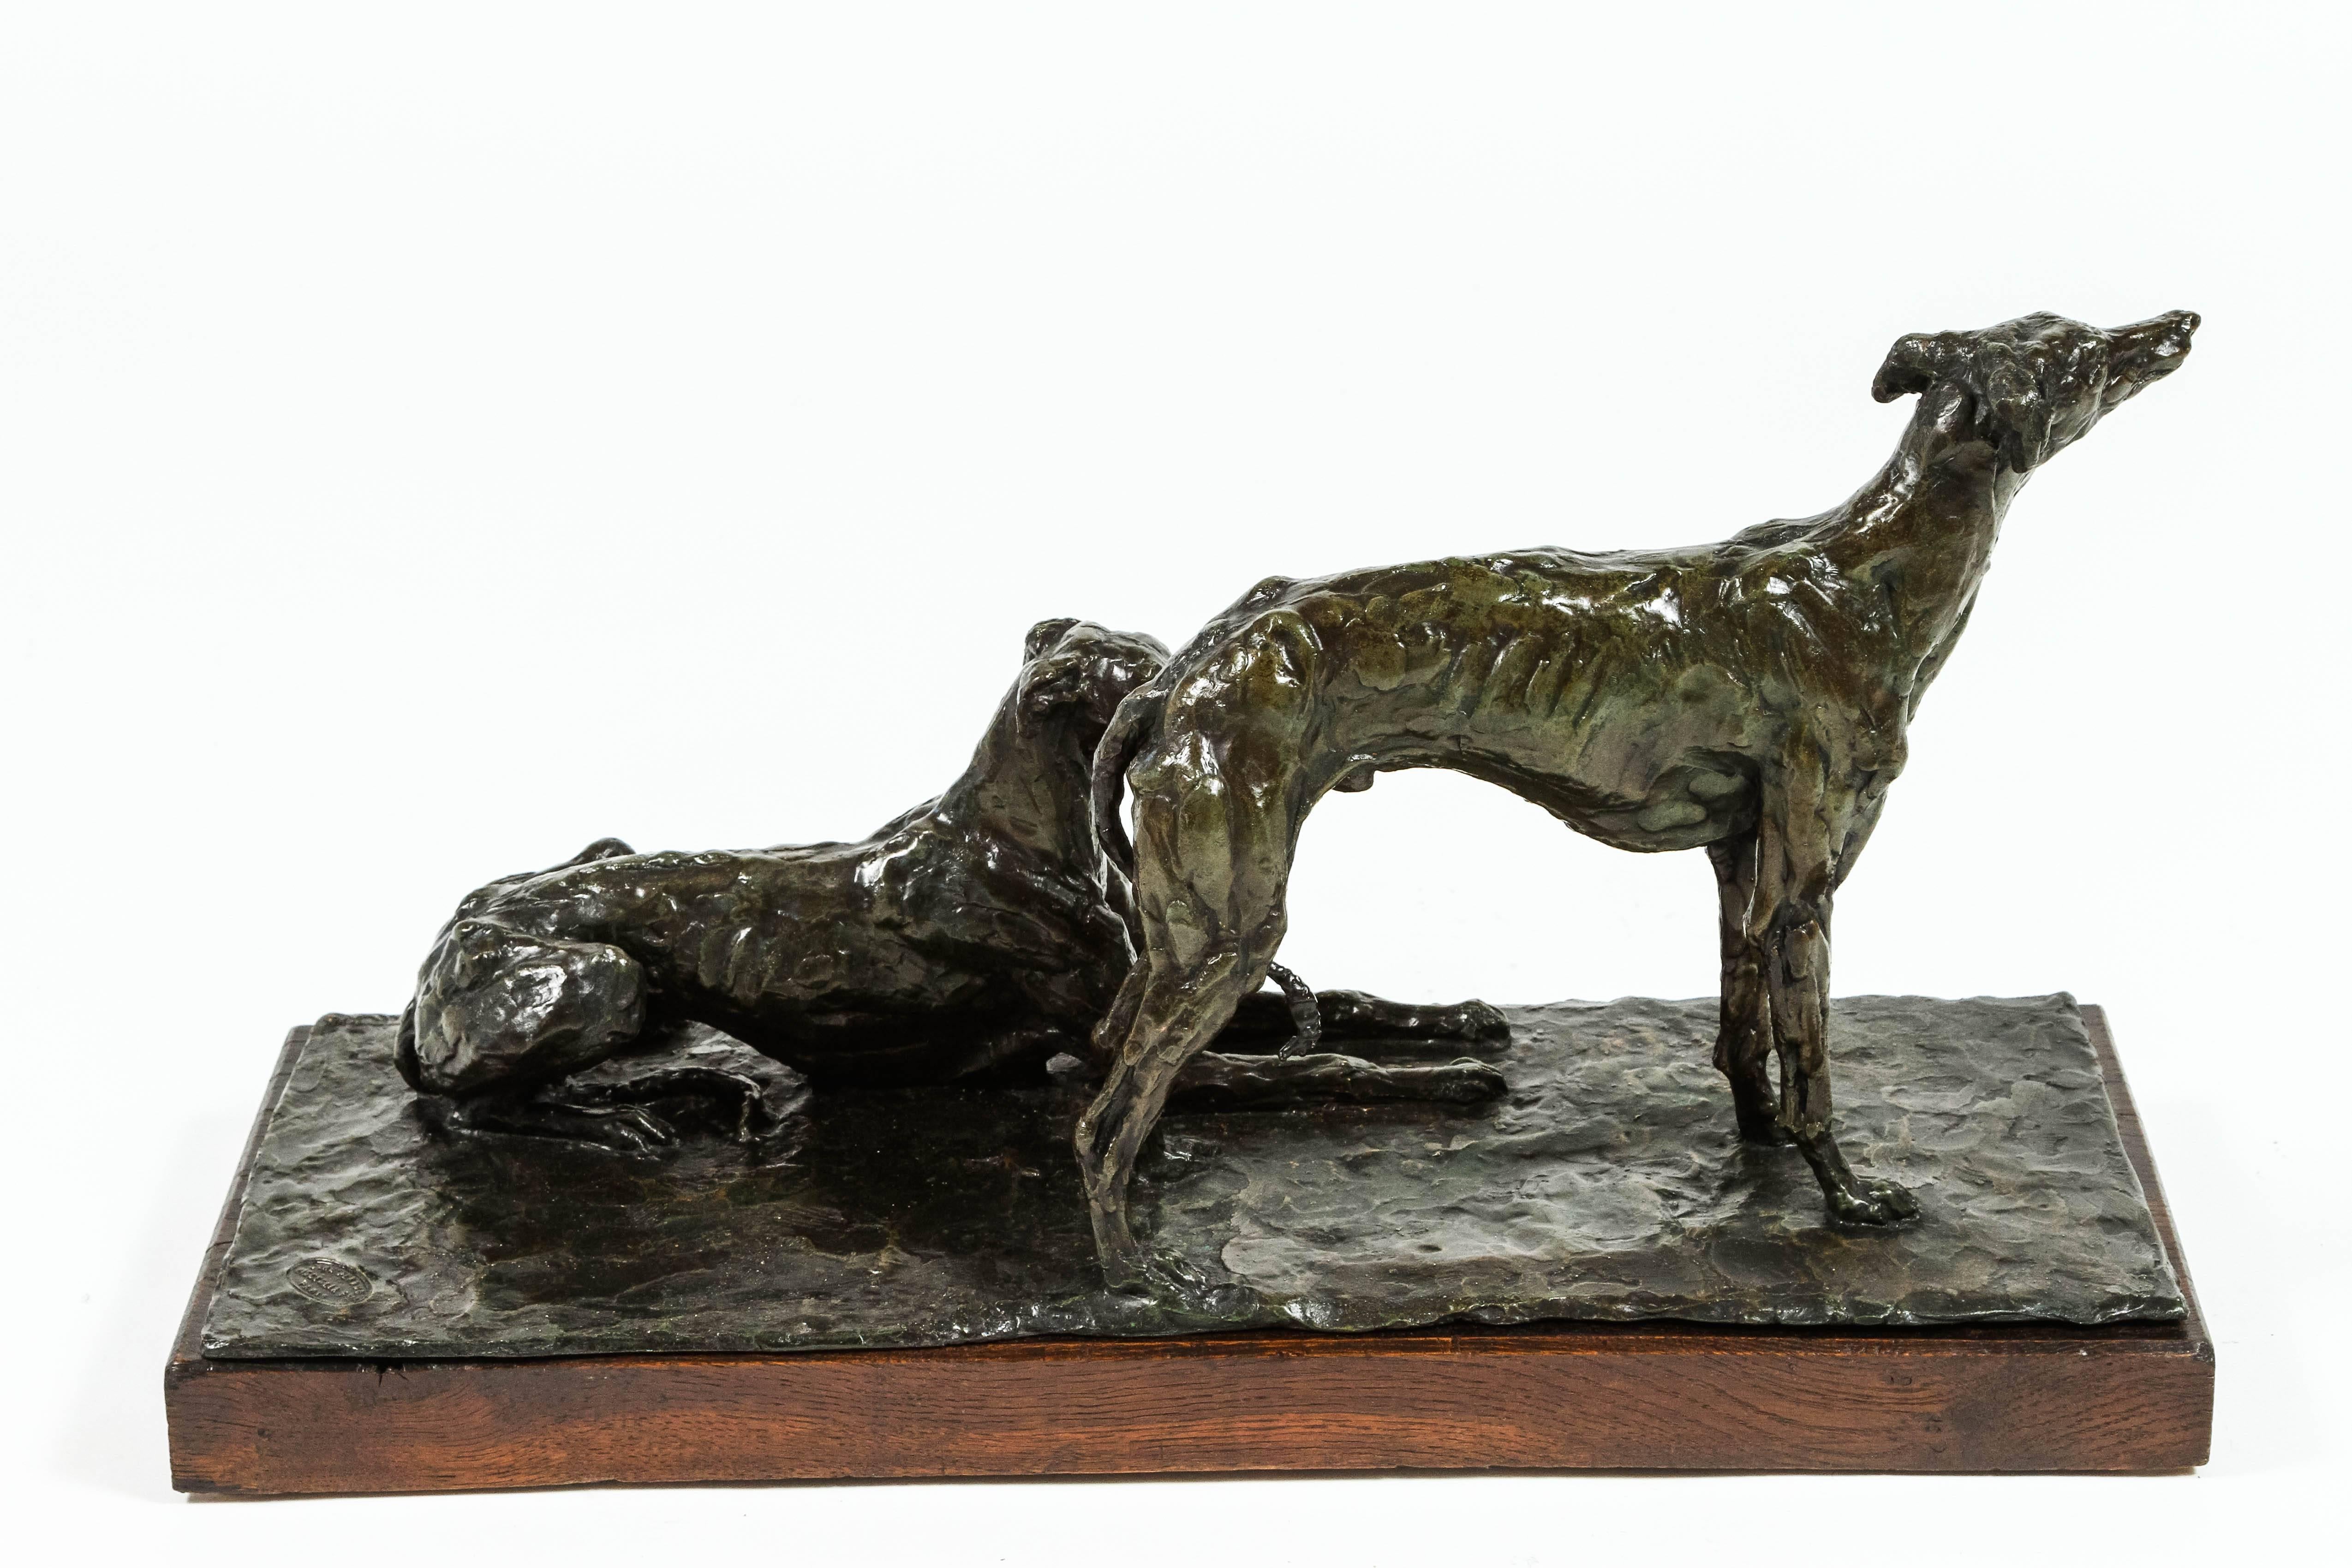 A beautiful and striking bronze of 2 Greyhounds one standing and the other reclining. Sculpted in a manner that gives the dogs a real sense of personality. 
This bronze was cast at Bisceglia Cire Perdu Foundry, Paris and dates from circa 1930. It is